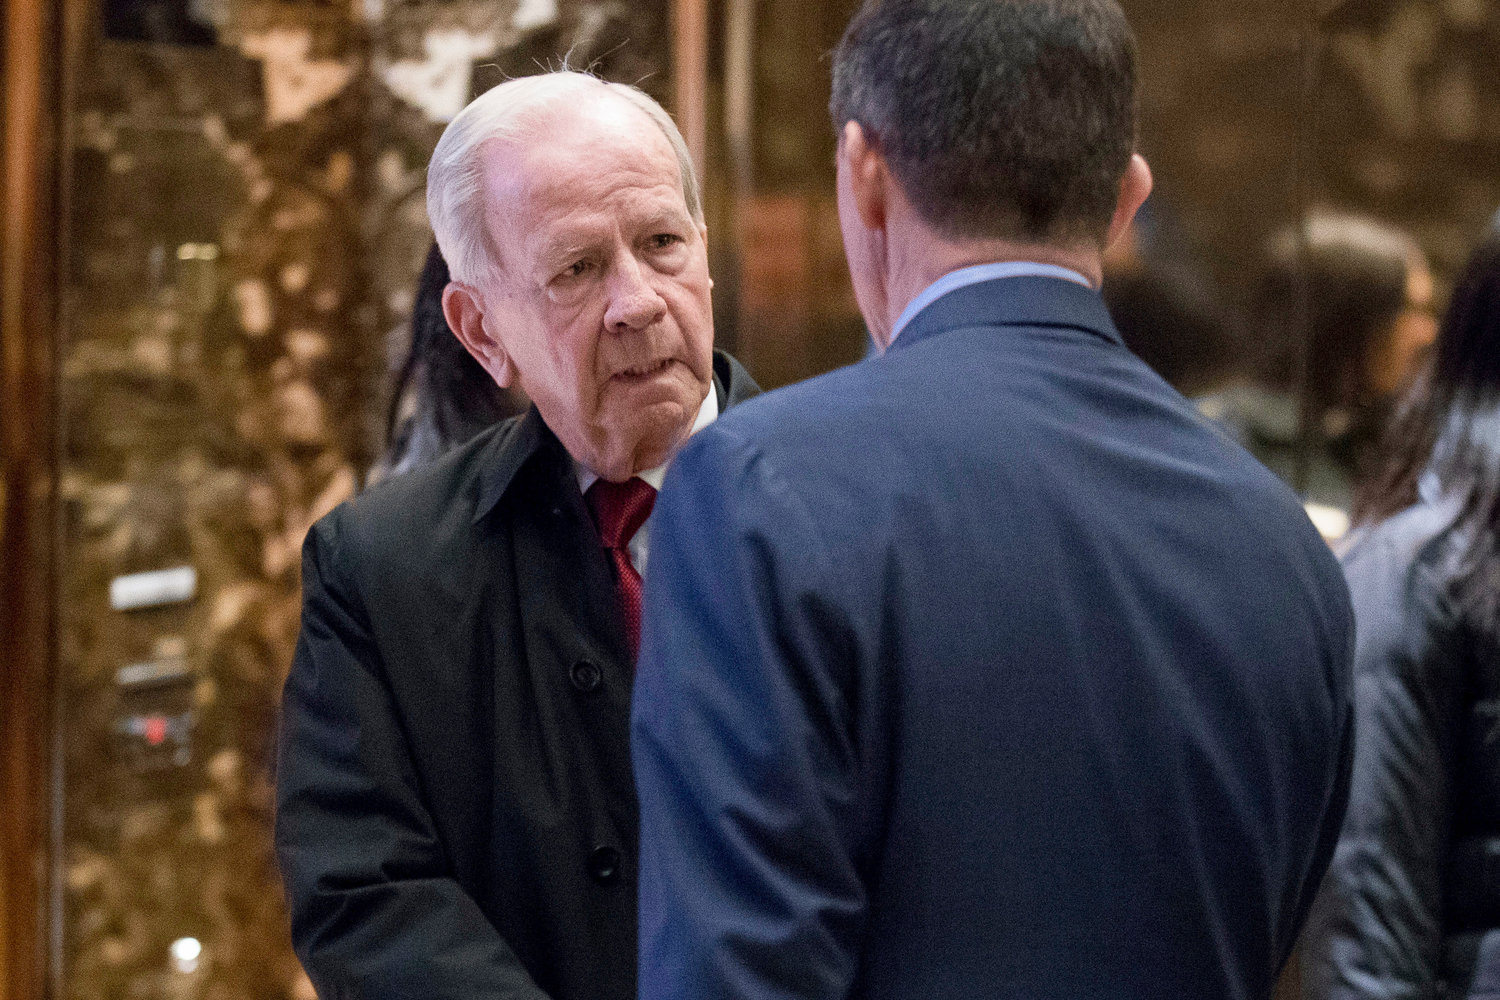 FILE - Robert C. McFarlane, left, is escorted by Michael Flynn, President-elect Donald Trump's nominee for national security adviser, right, as he departs Trump Tower, Dec. 5, 2016, in New York. McFarlane, a top aide to President Ronald Reagan who pleaded guilty to charges for his role in an illegal arms-for-hostages deal known as the Iran-Contra affair, died Thursday, May 12, 2022. He was 84. (AP Photo/Andrew Harnik)